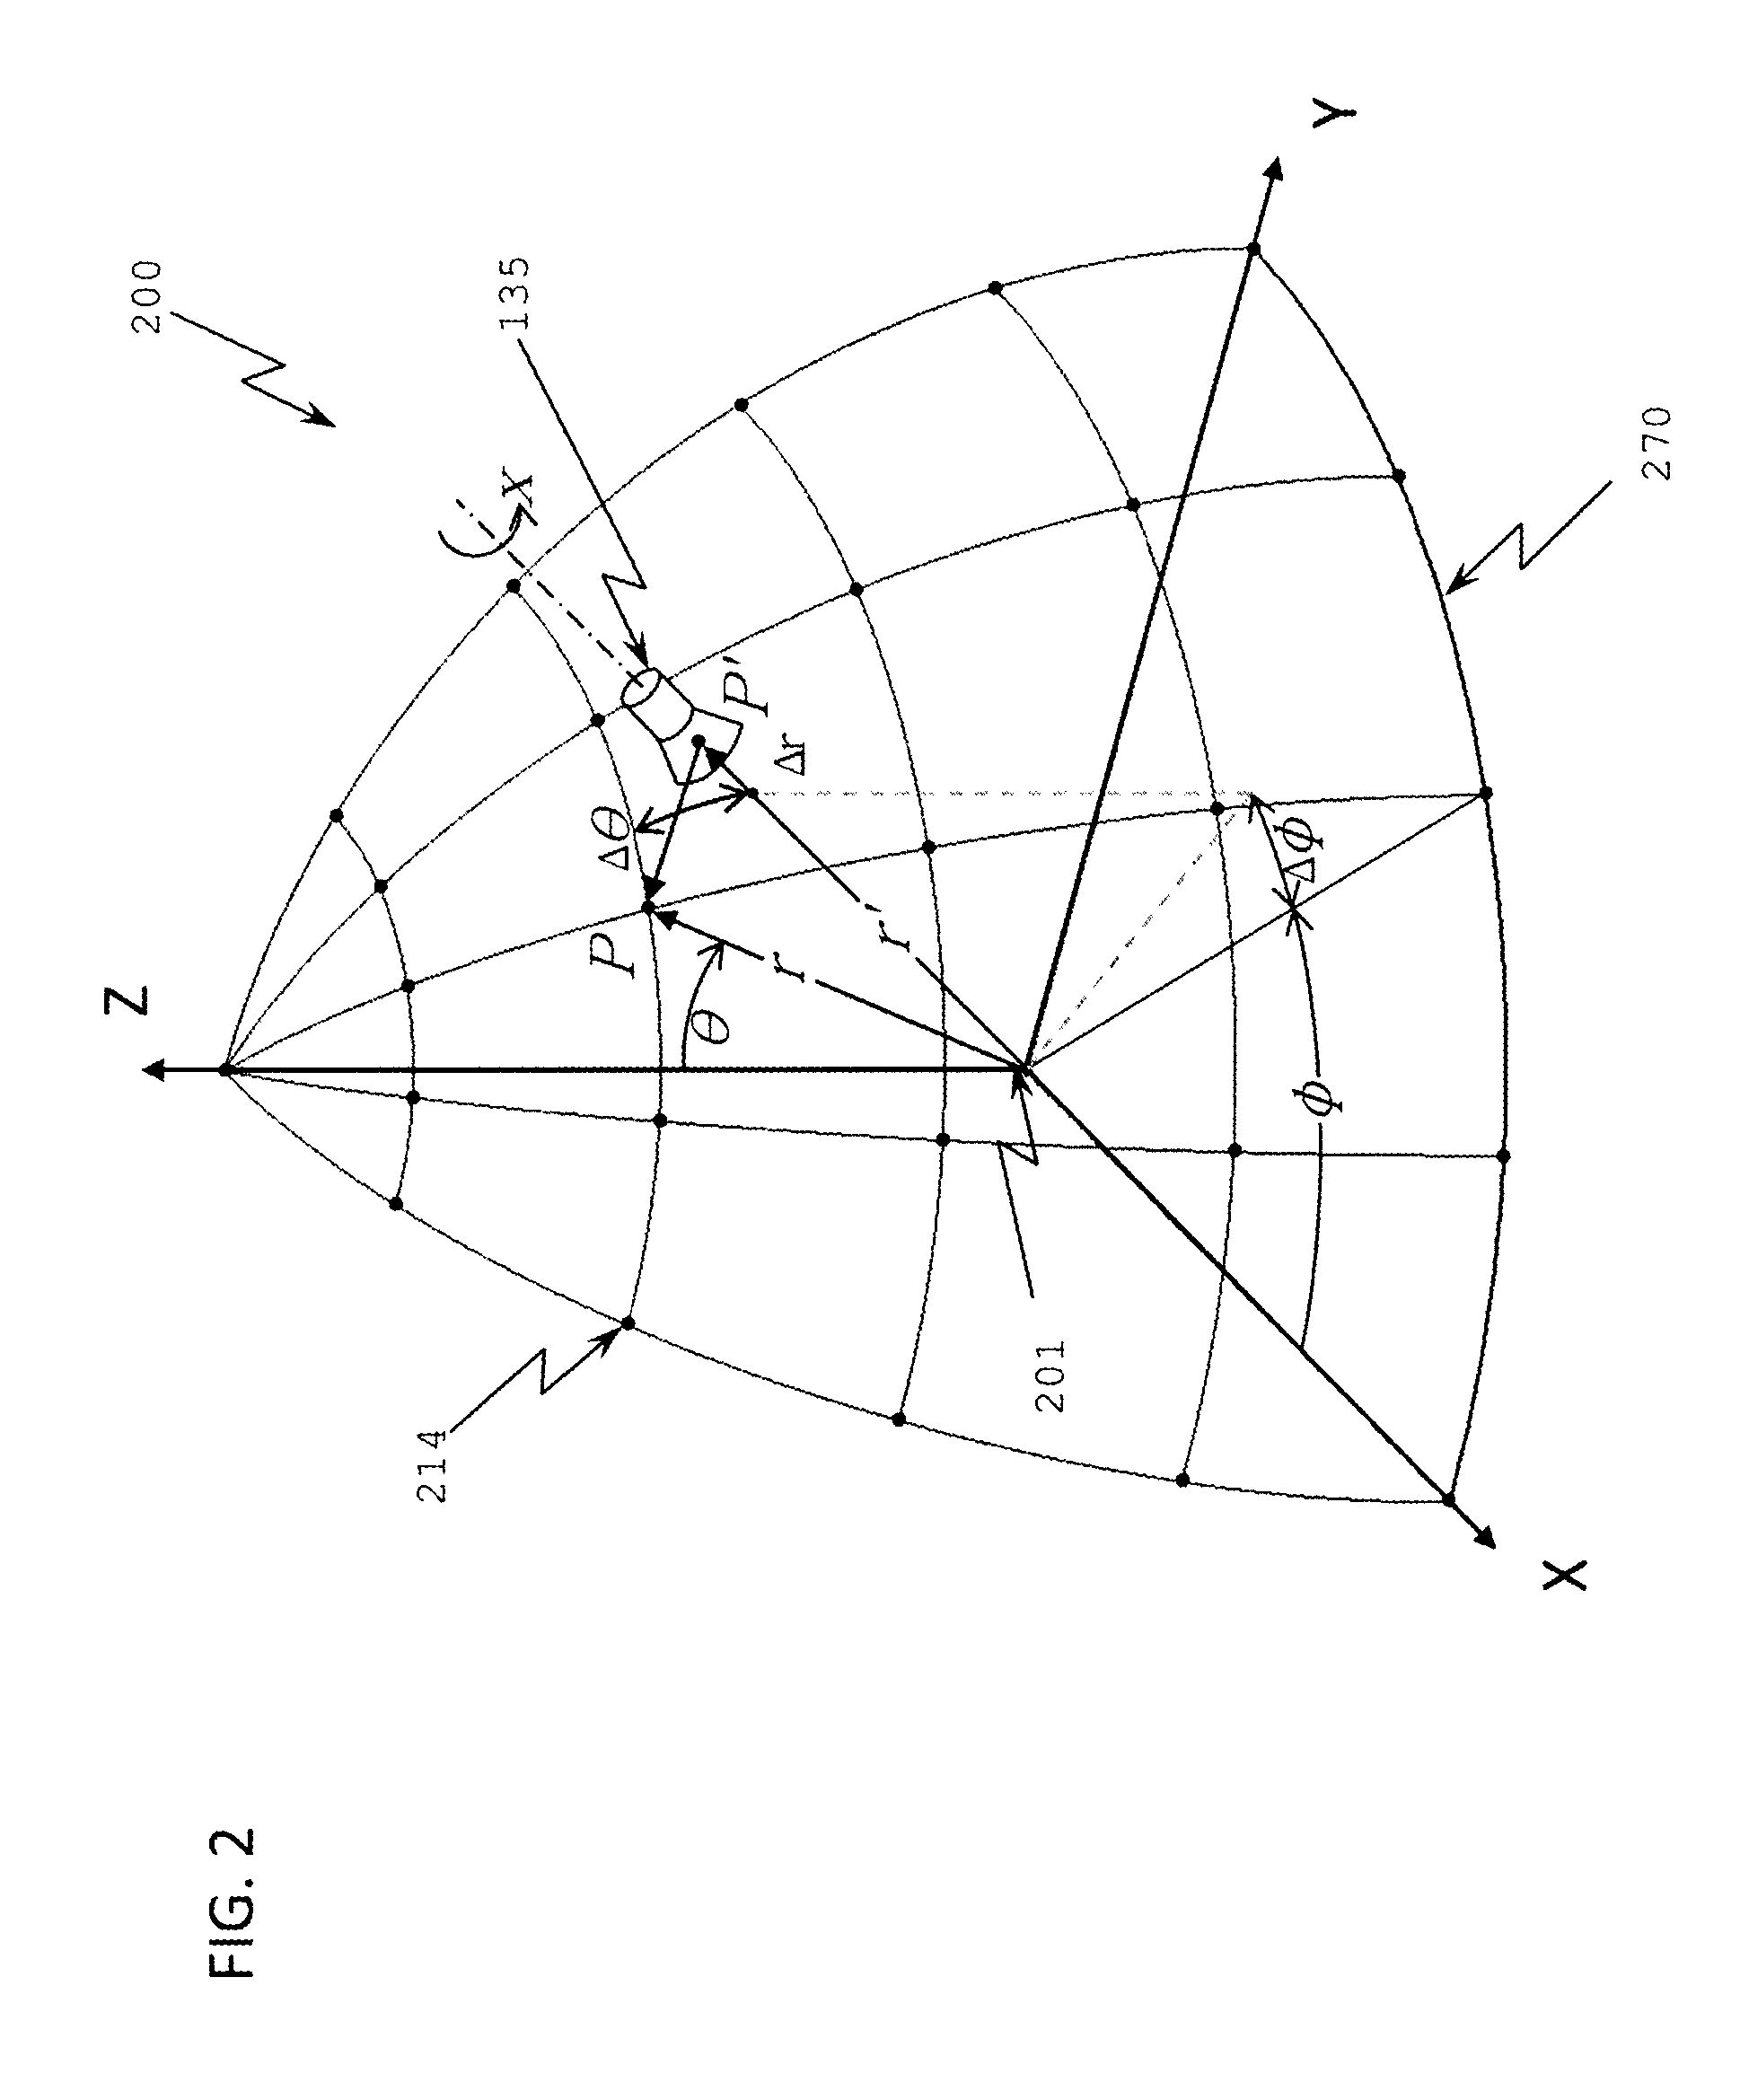 Radiation measurement system and method with synchronous high speed tracking laser based position measurement